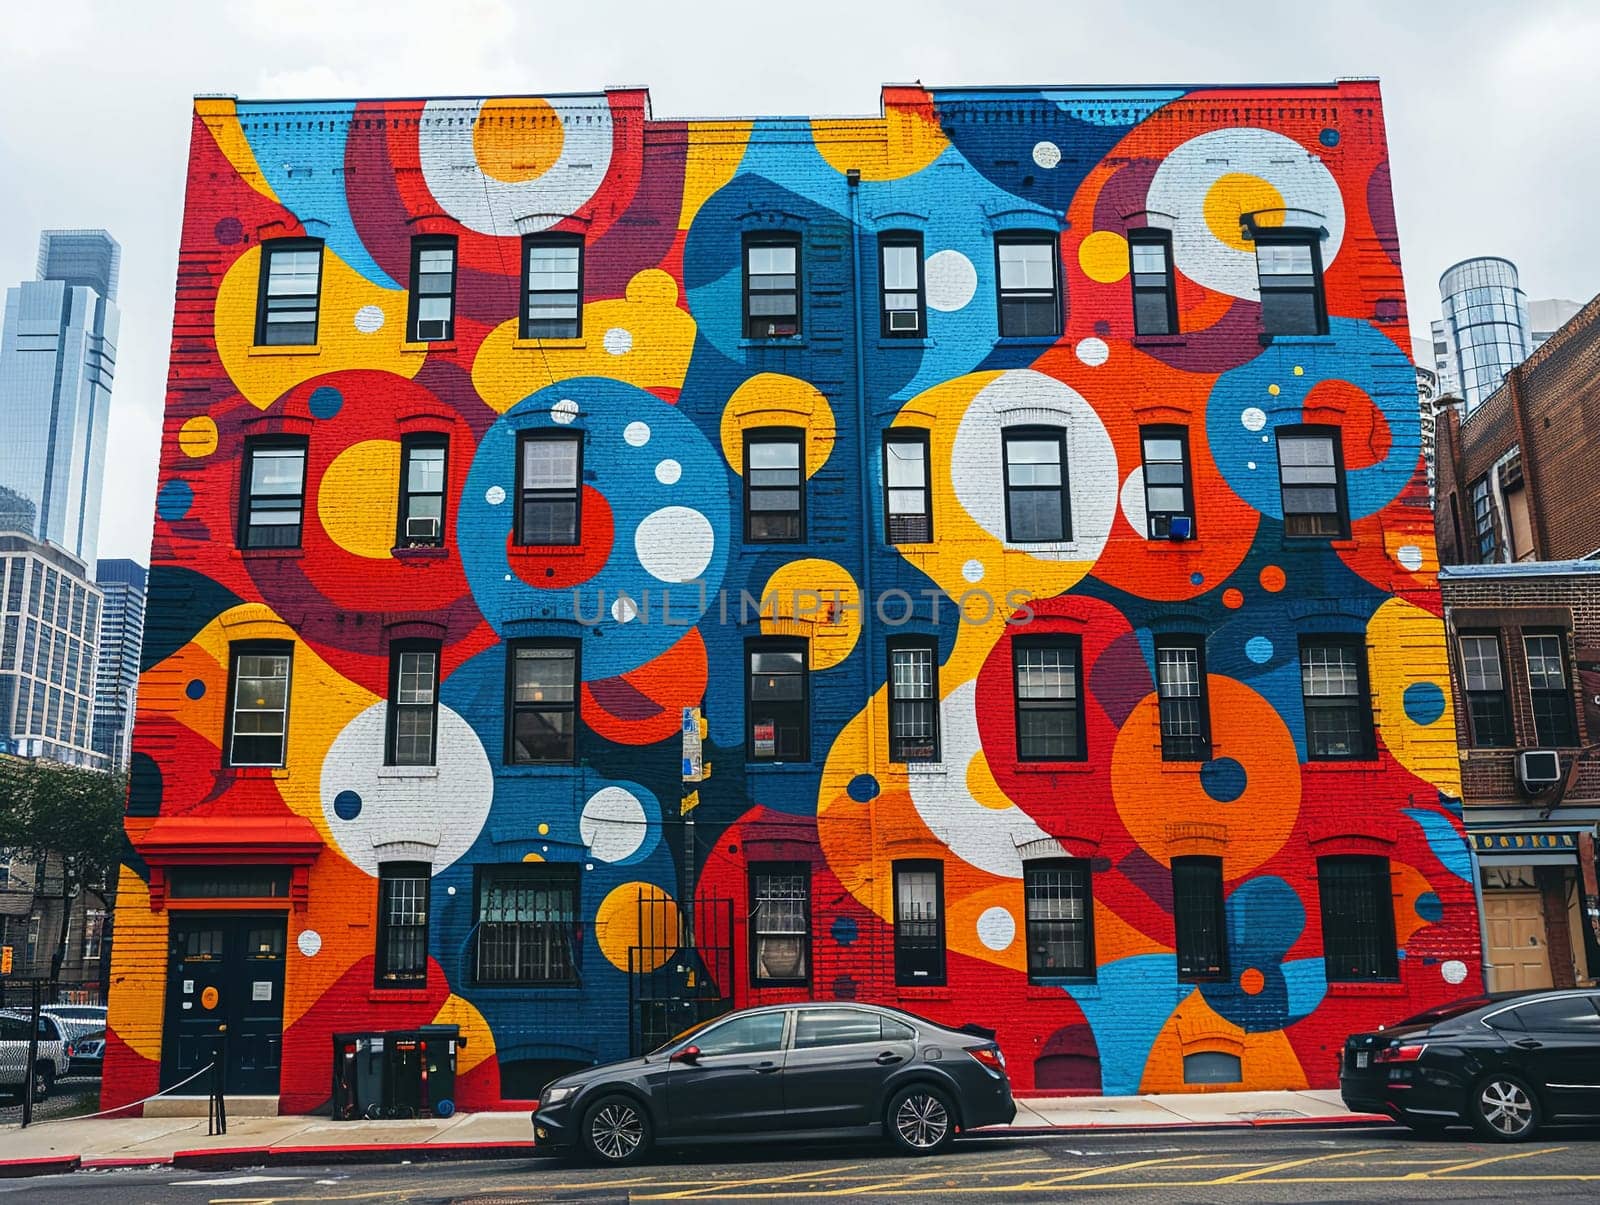 Colorful mural on a city building, capturing urban art and community themes.